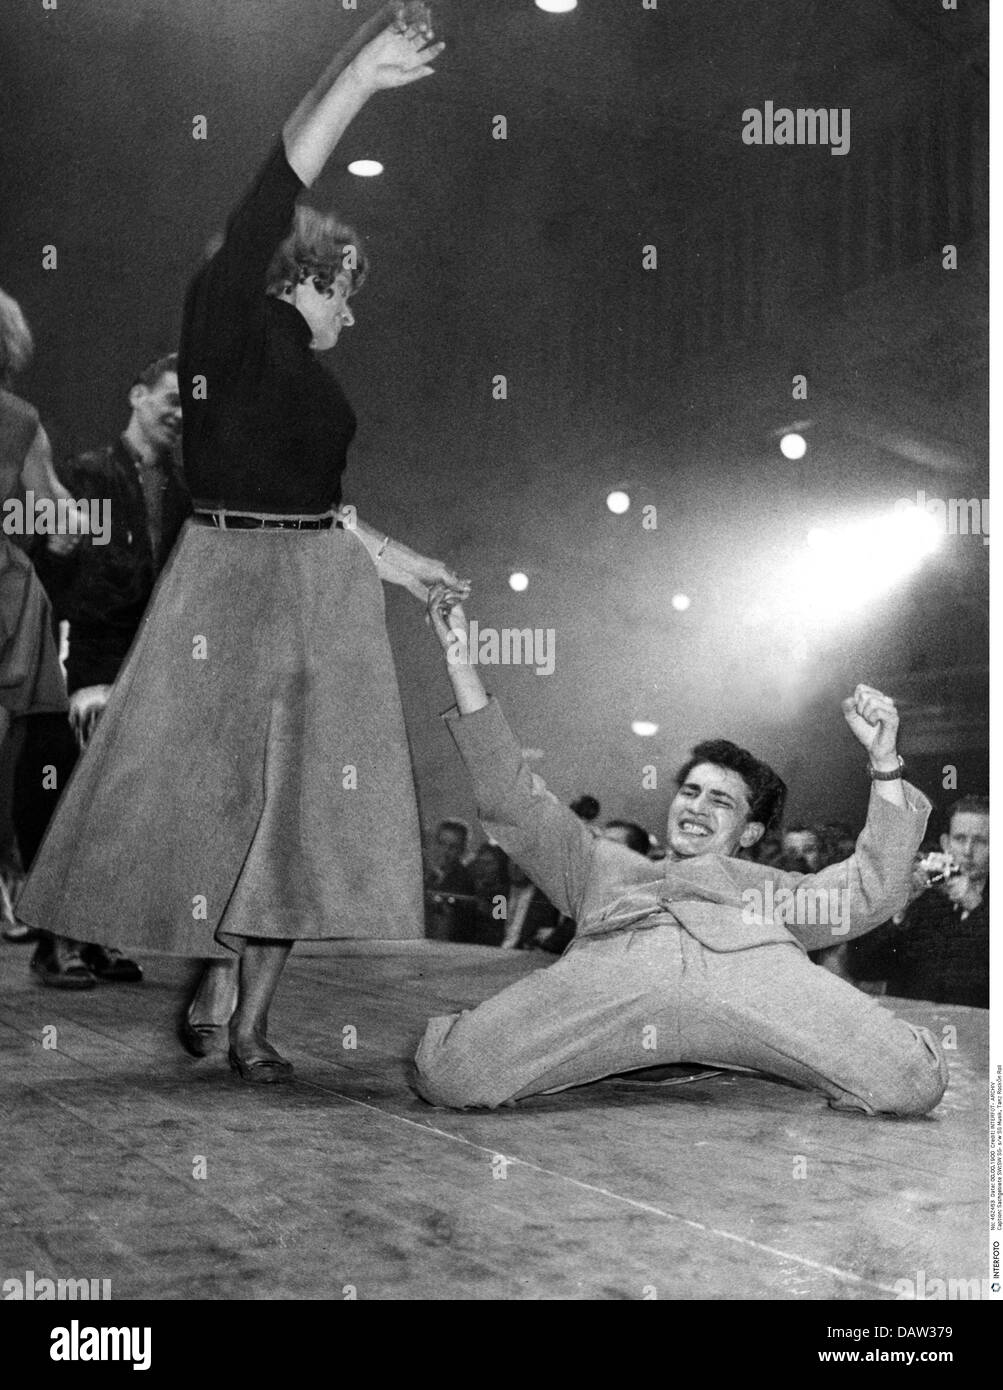 dance, Rock'n Roll, couple dancing Rock'n Roll, dancing contest, 1956, Additional-Rights-Clearences-Not Available Stock Photo